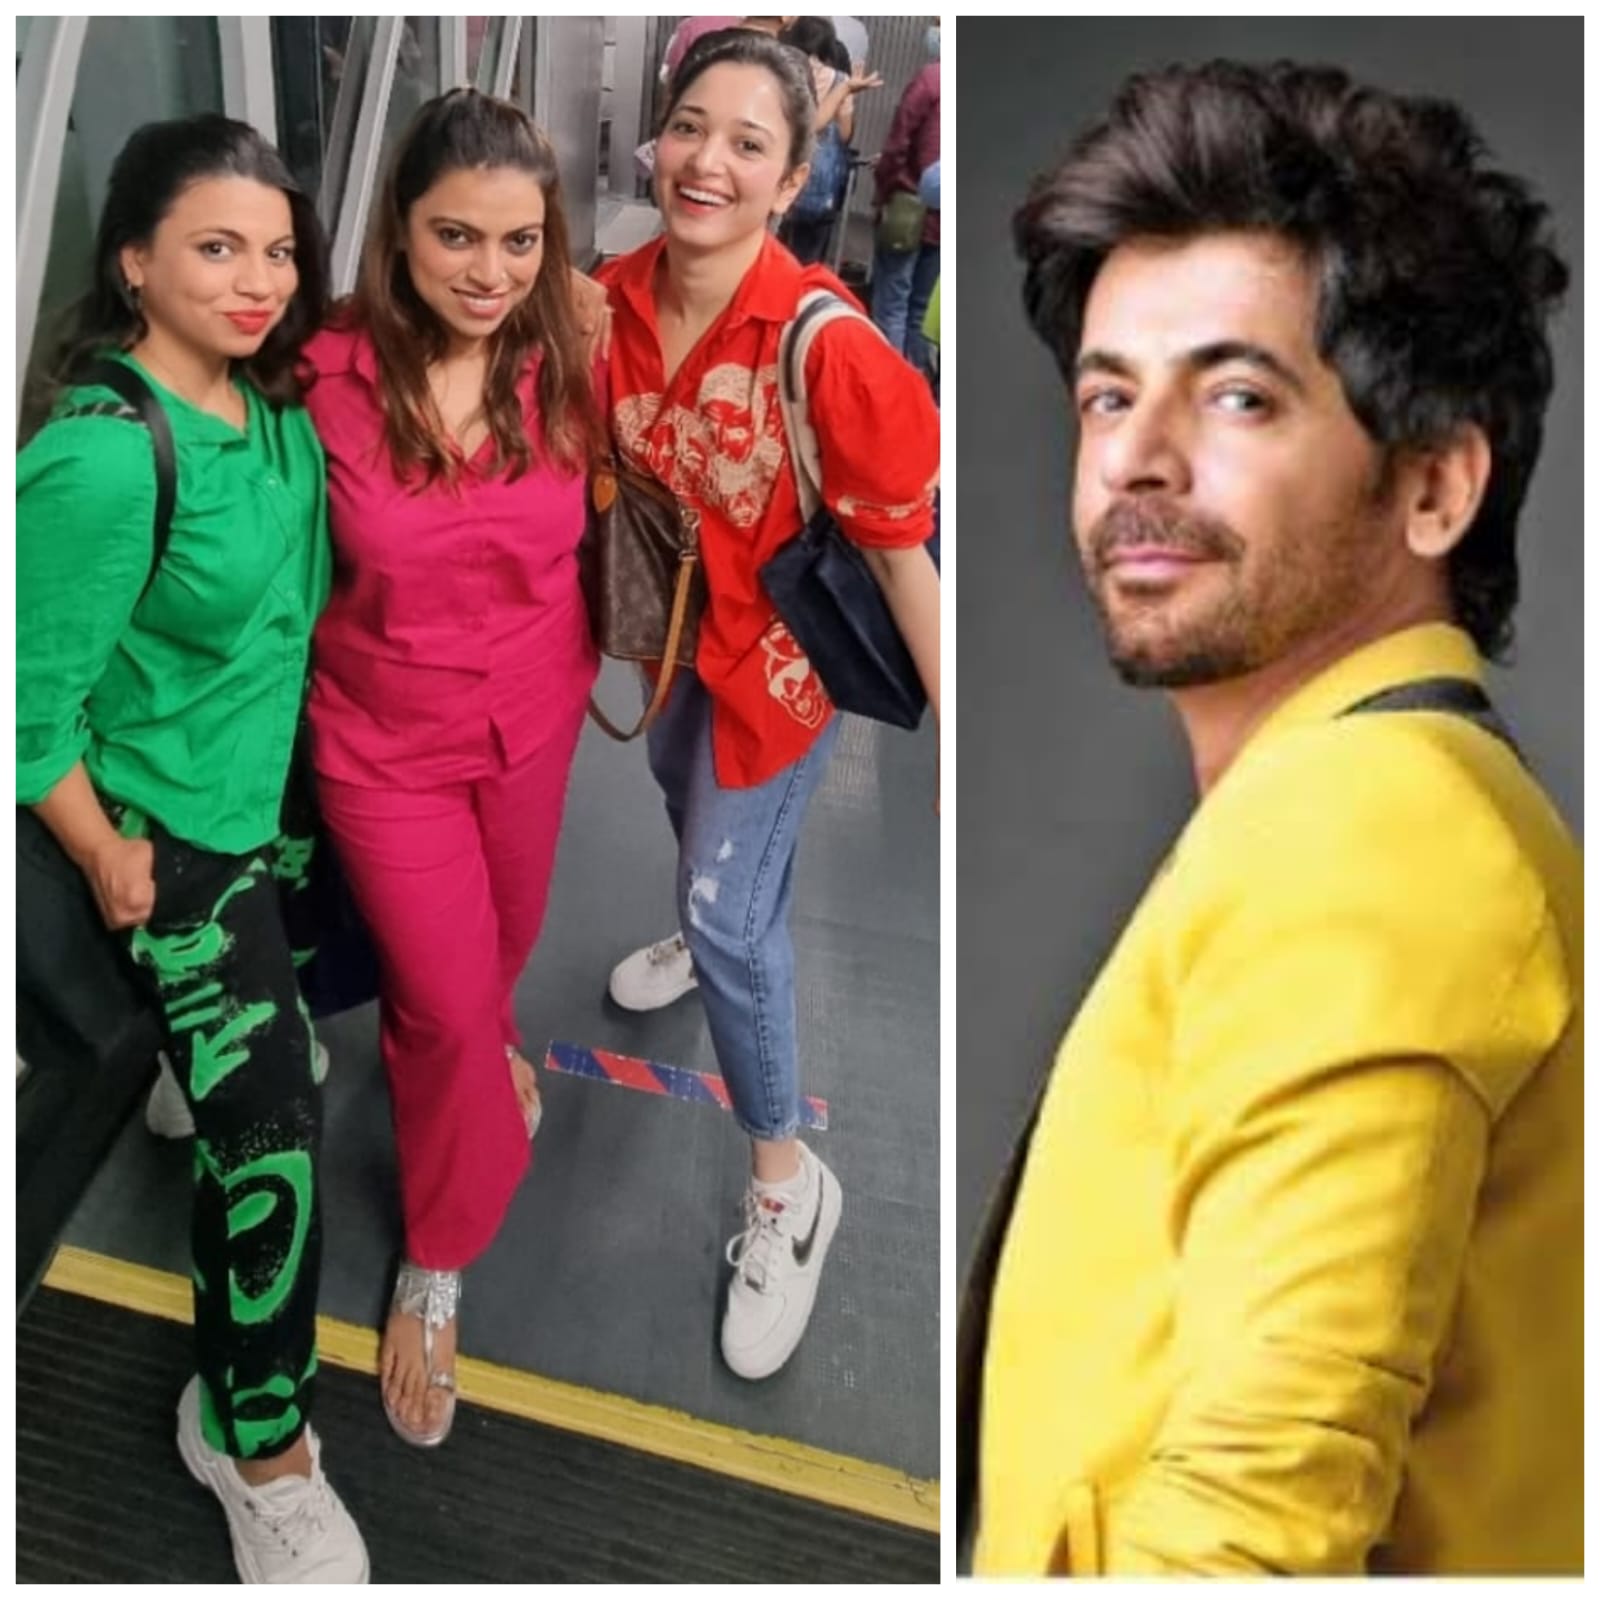 Preeti & Neeti in Tamannaah Bhatia for a Hotstar web series Sunil Grover to be a part of it as well?